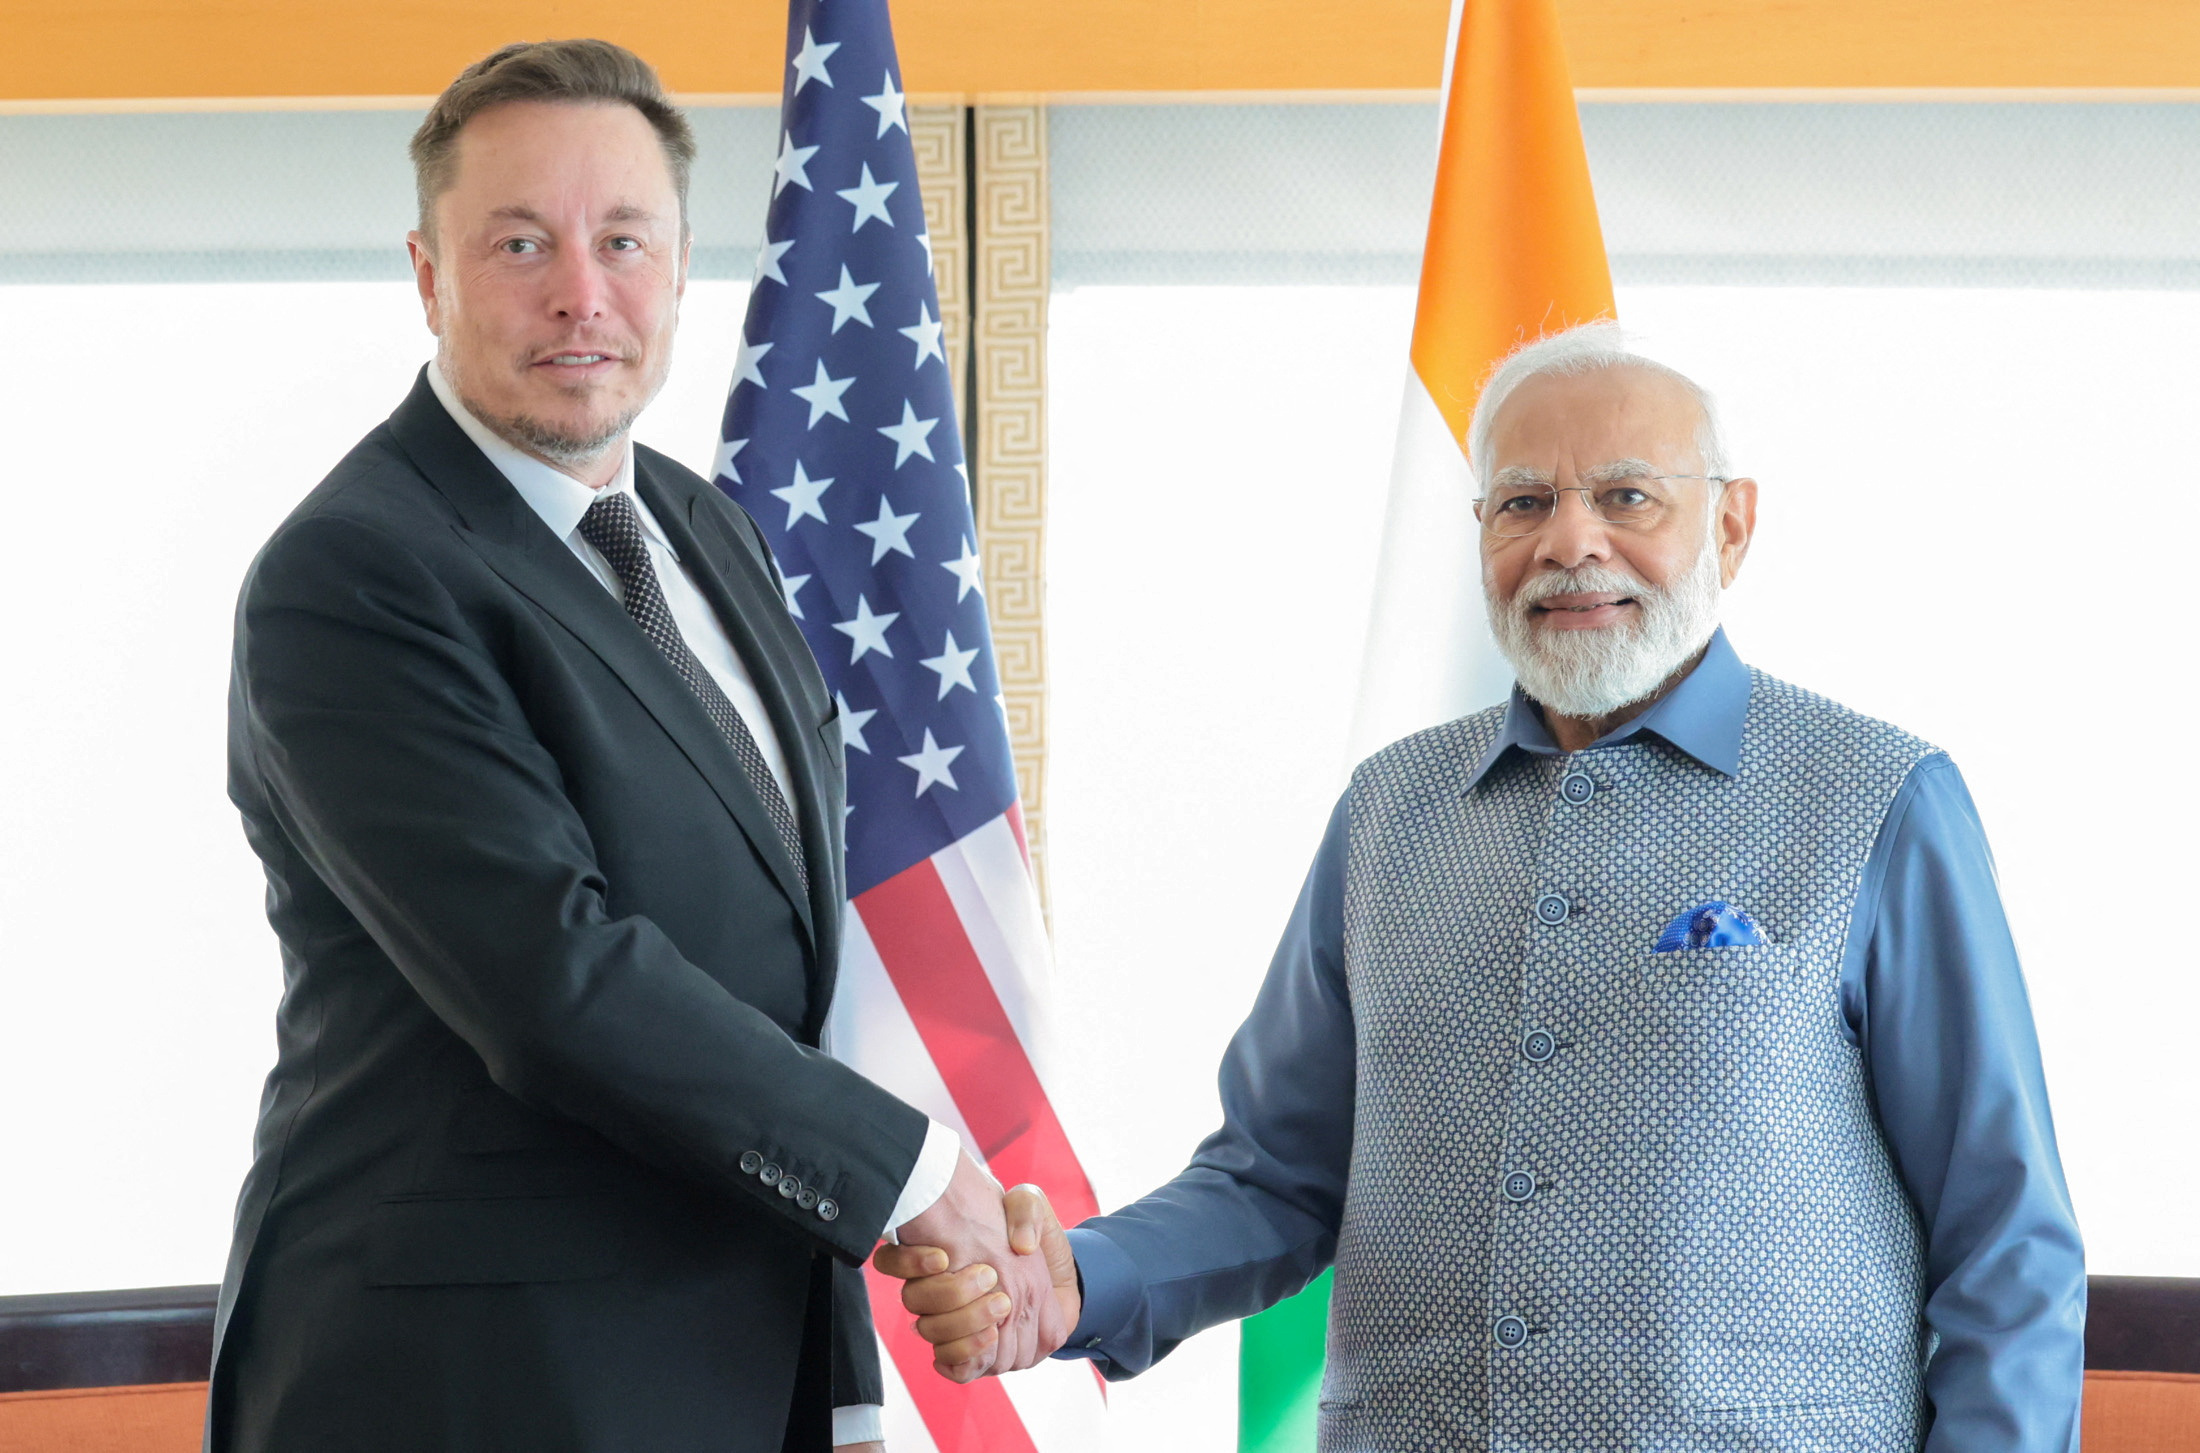 India’s Prime Minister Narendra Modi shakes hand with Tesla CEO Elon Musk during their meeting in New York